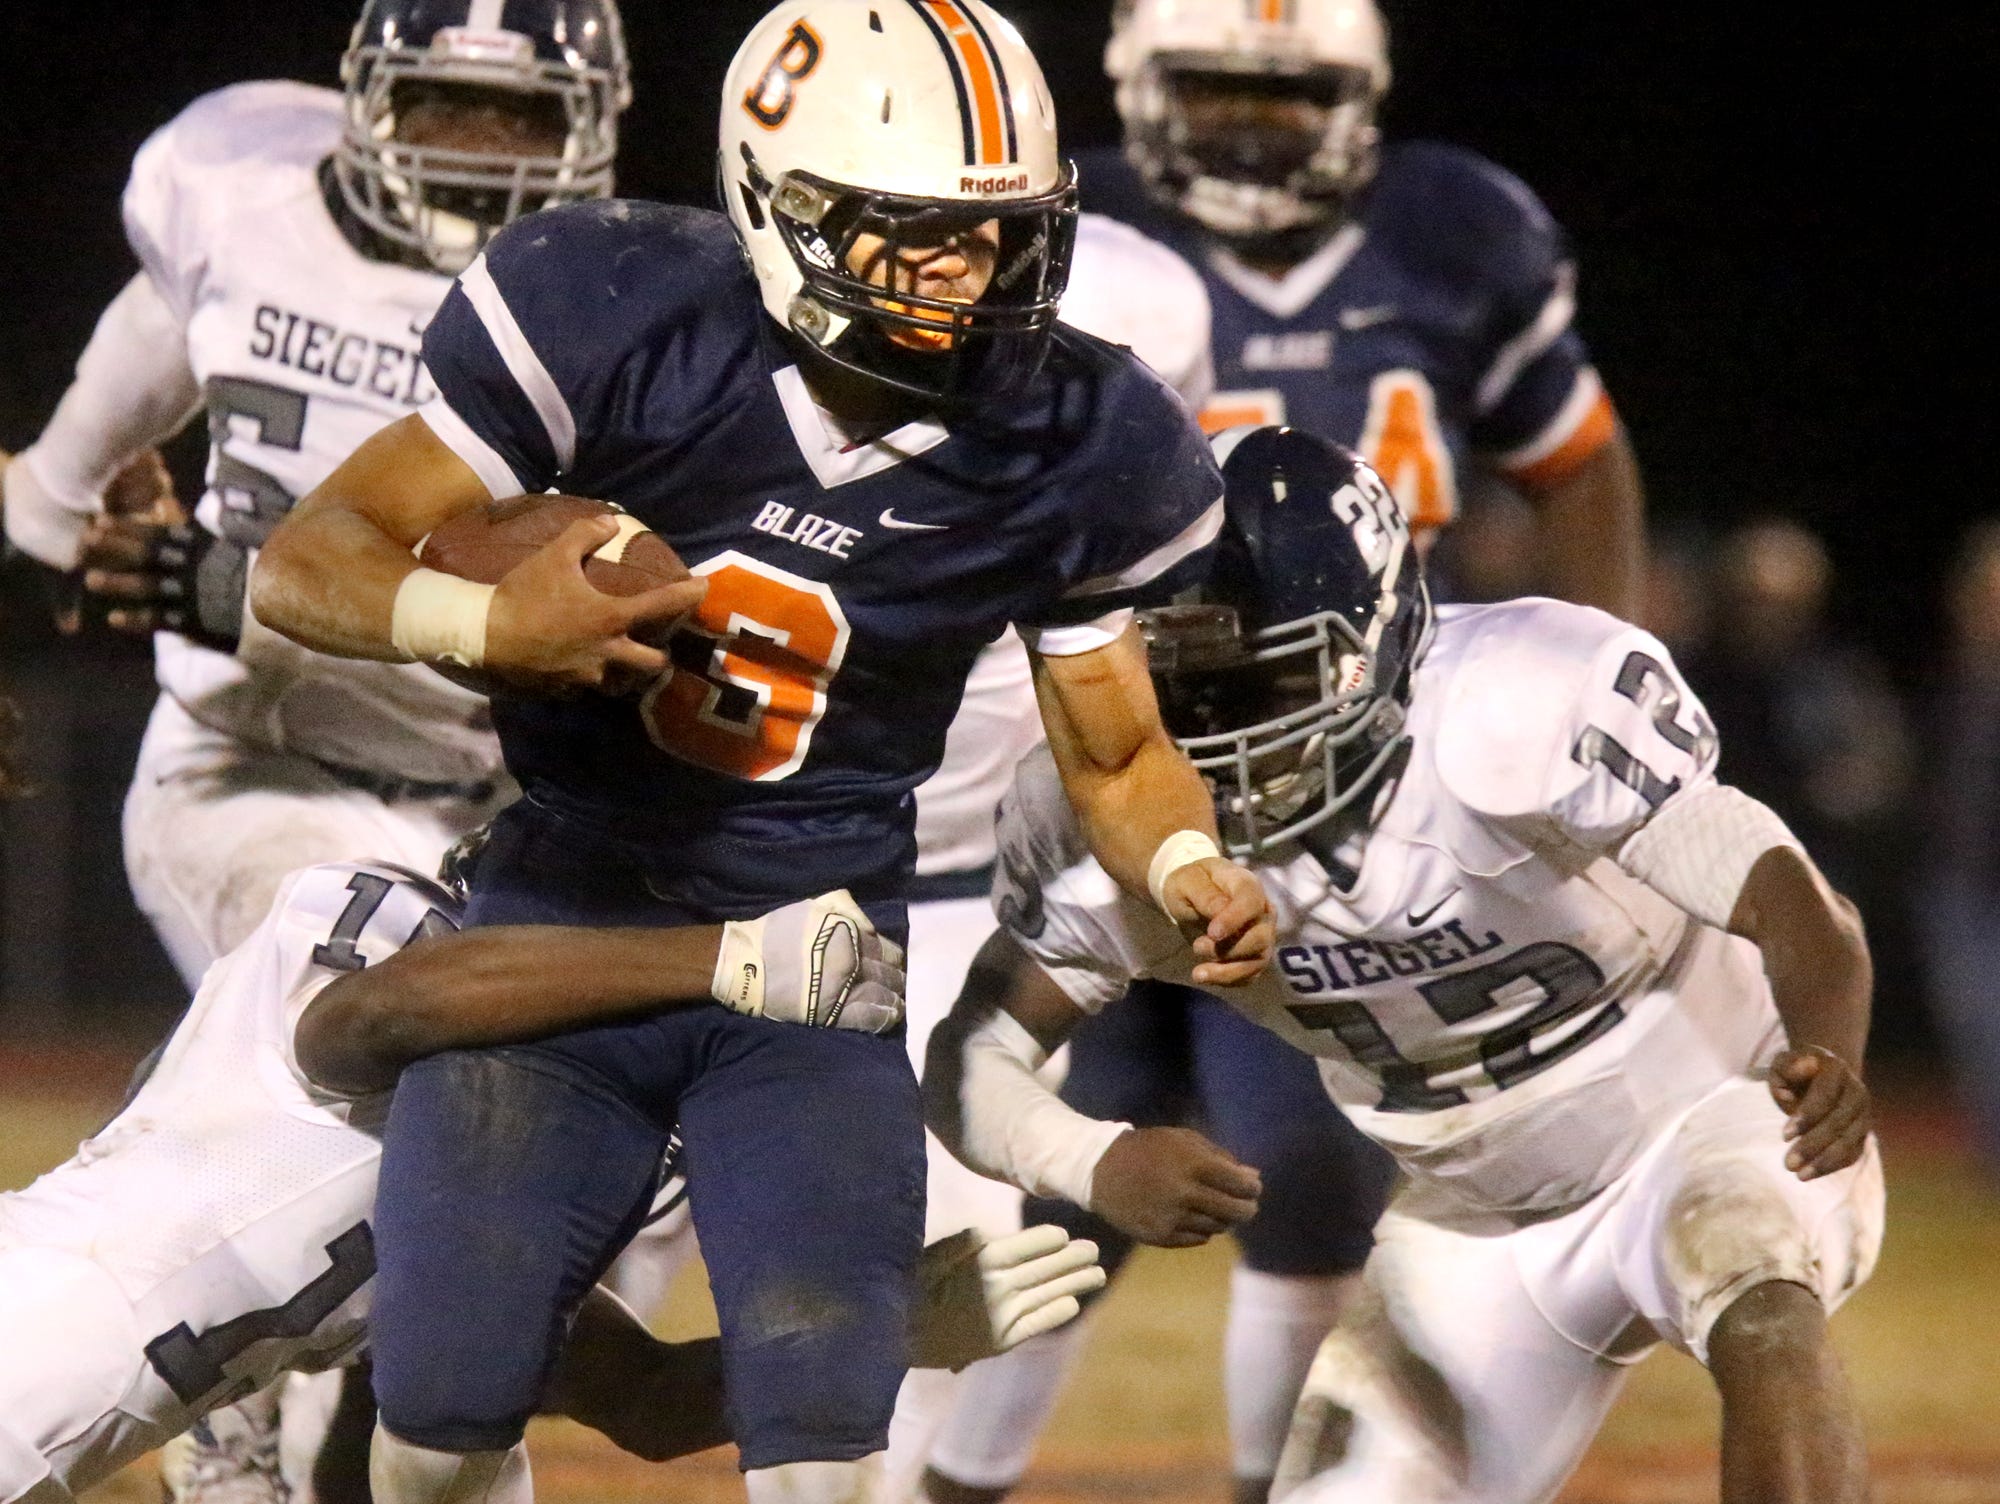 Blackman's Taeler Dowdy (3) is tackled by Siegel's Justin Perry (15) and Gef Elder (12) on Friday.